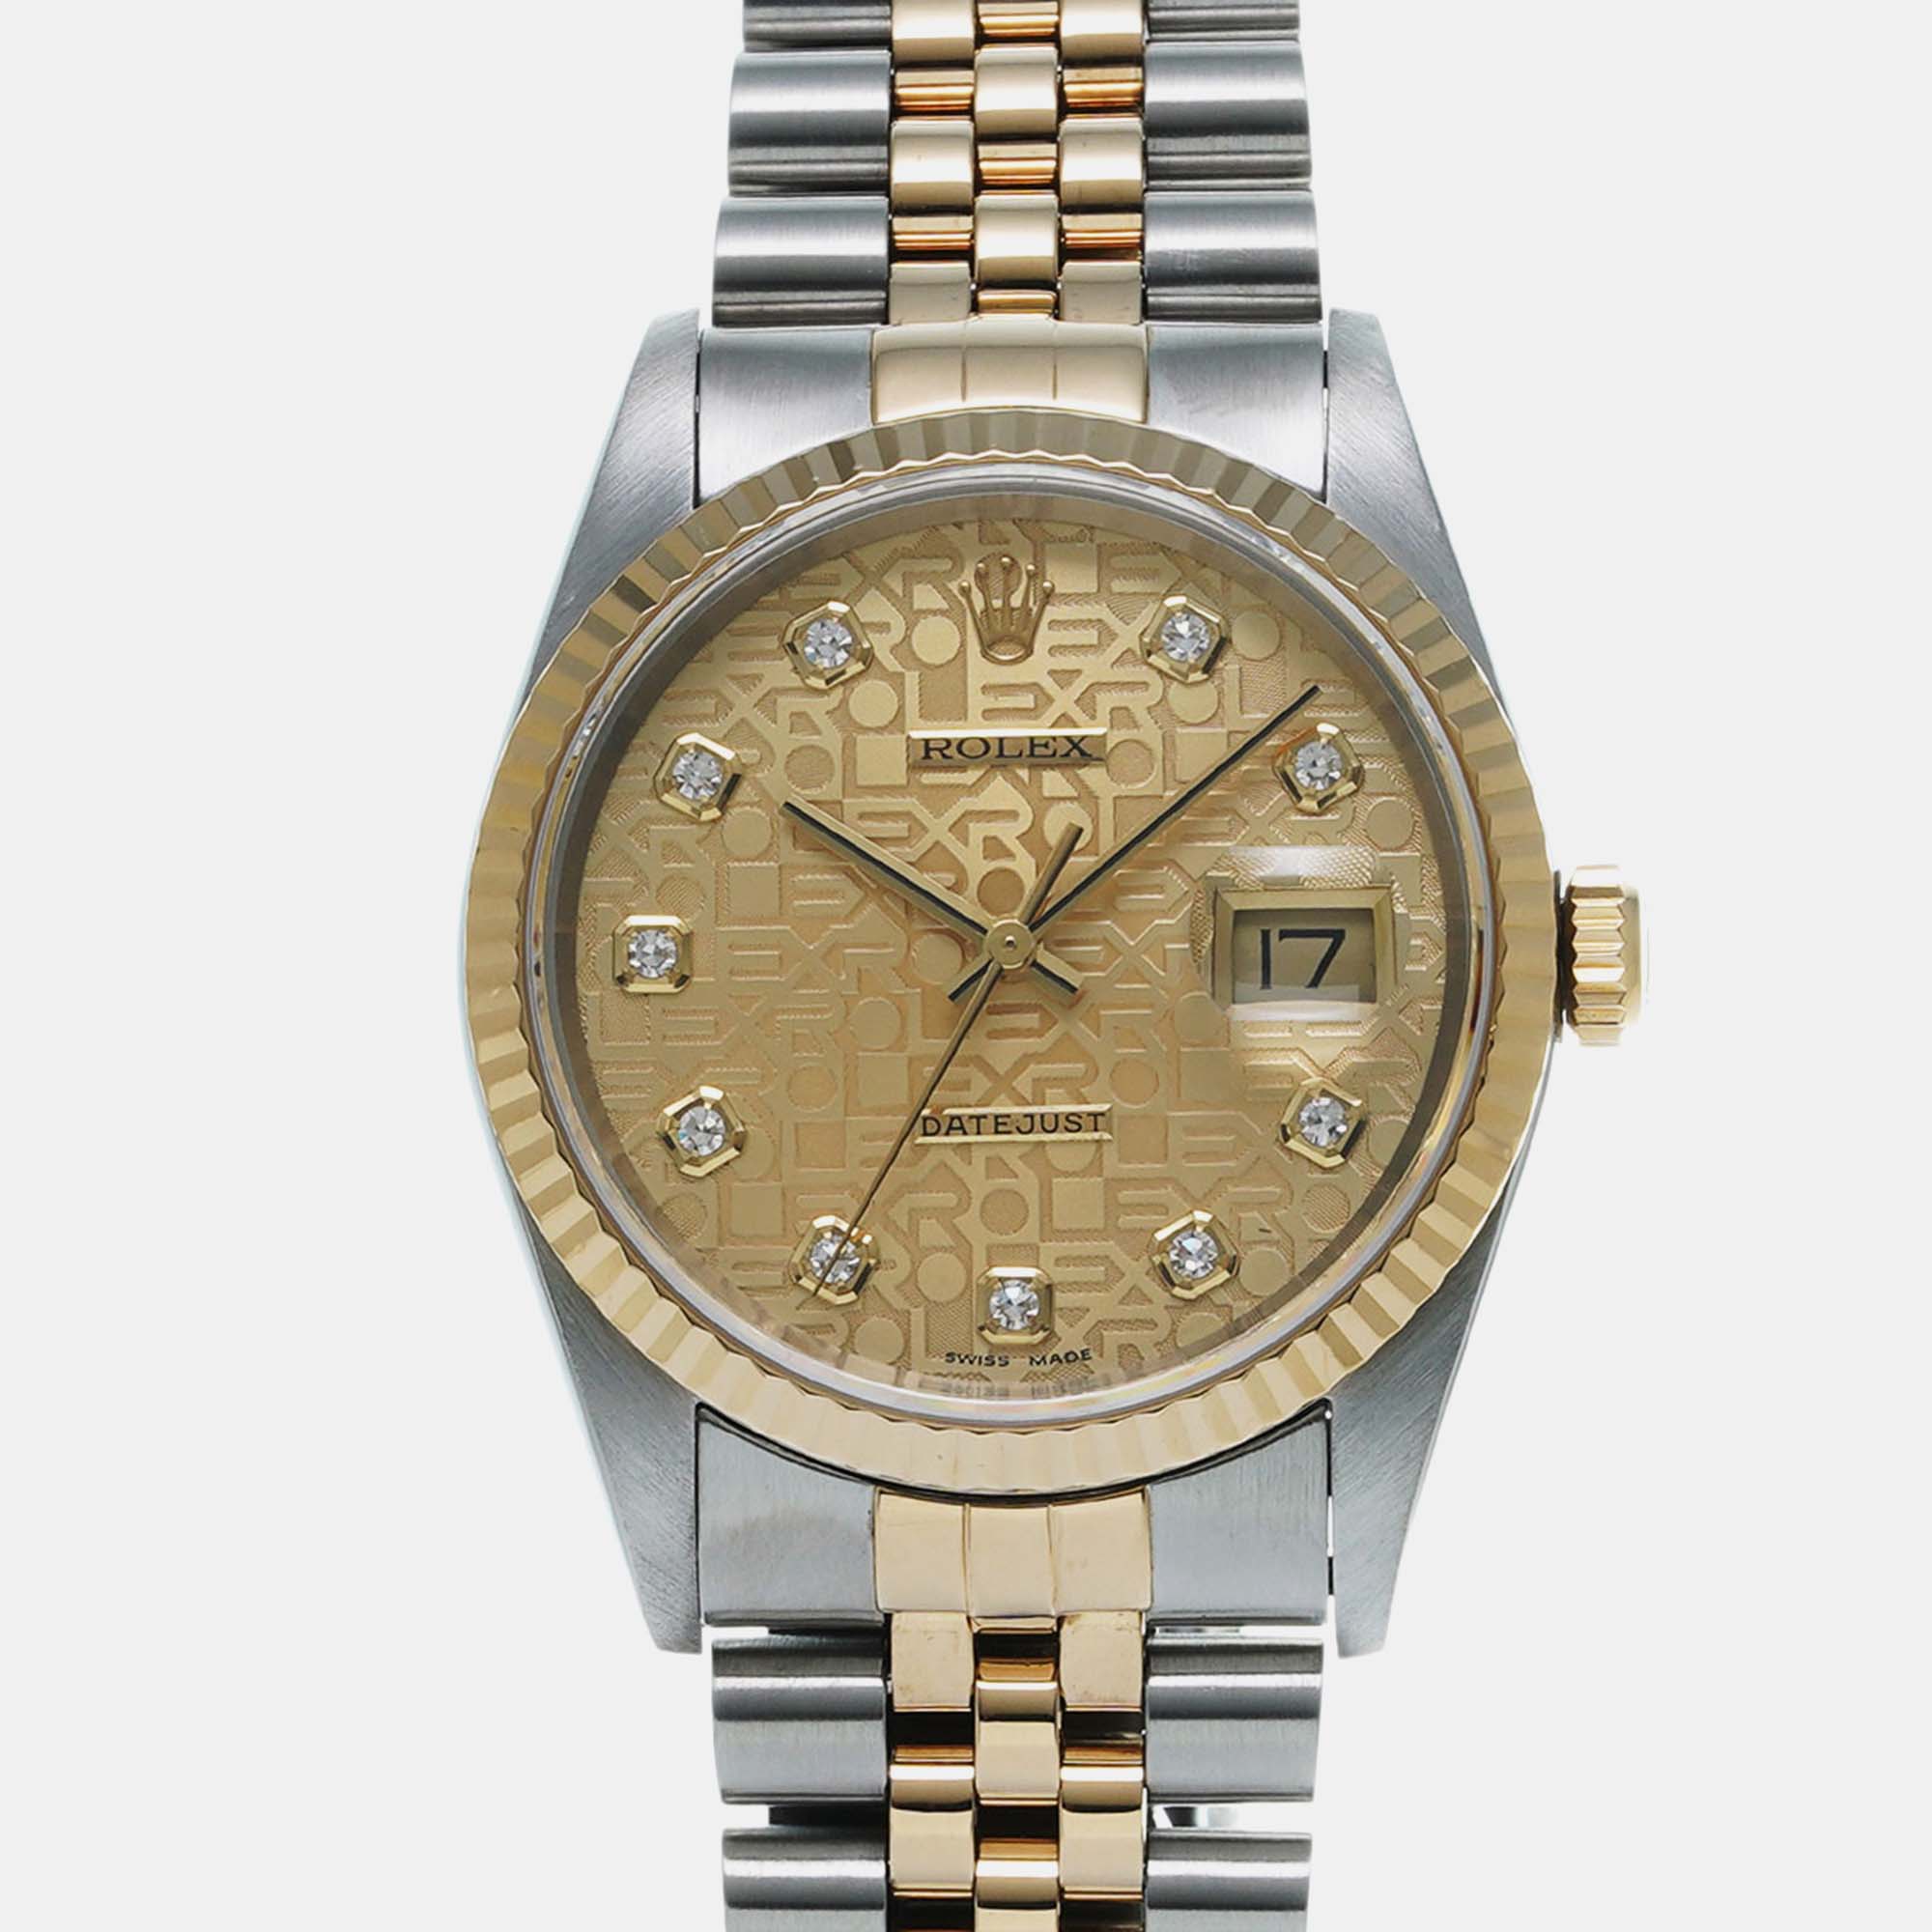 Pre-owned Rolex Champagne 18k Yellow Gold Stainless Steel Diamond Datejust 16233 Automatic Men's Wristwatch 36 Mm